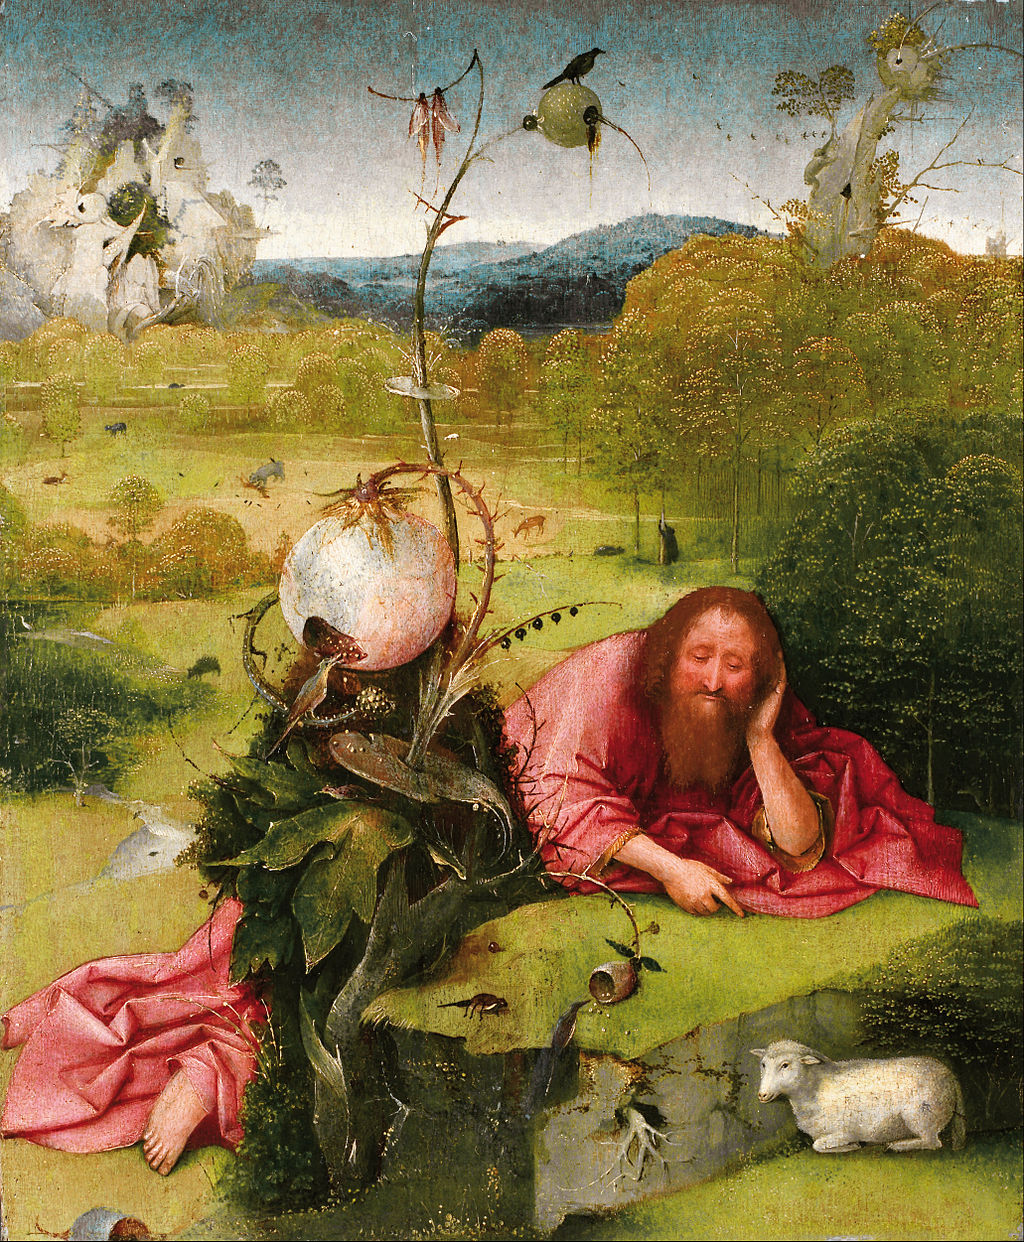 St. John the Baptist in the Wilderness by Hieronymus Bosch Reproduction Oil on Canvas by Blue Surf Art